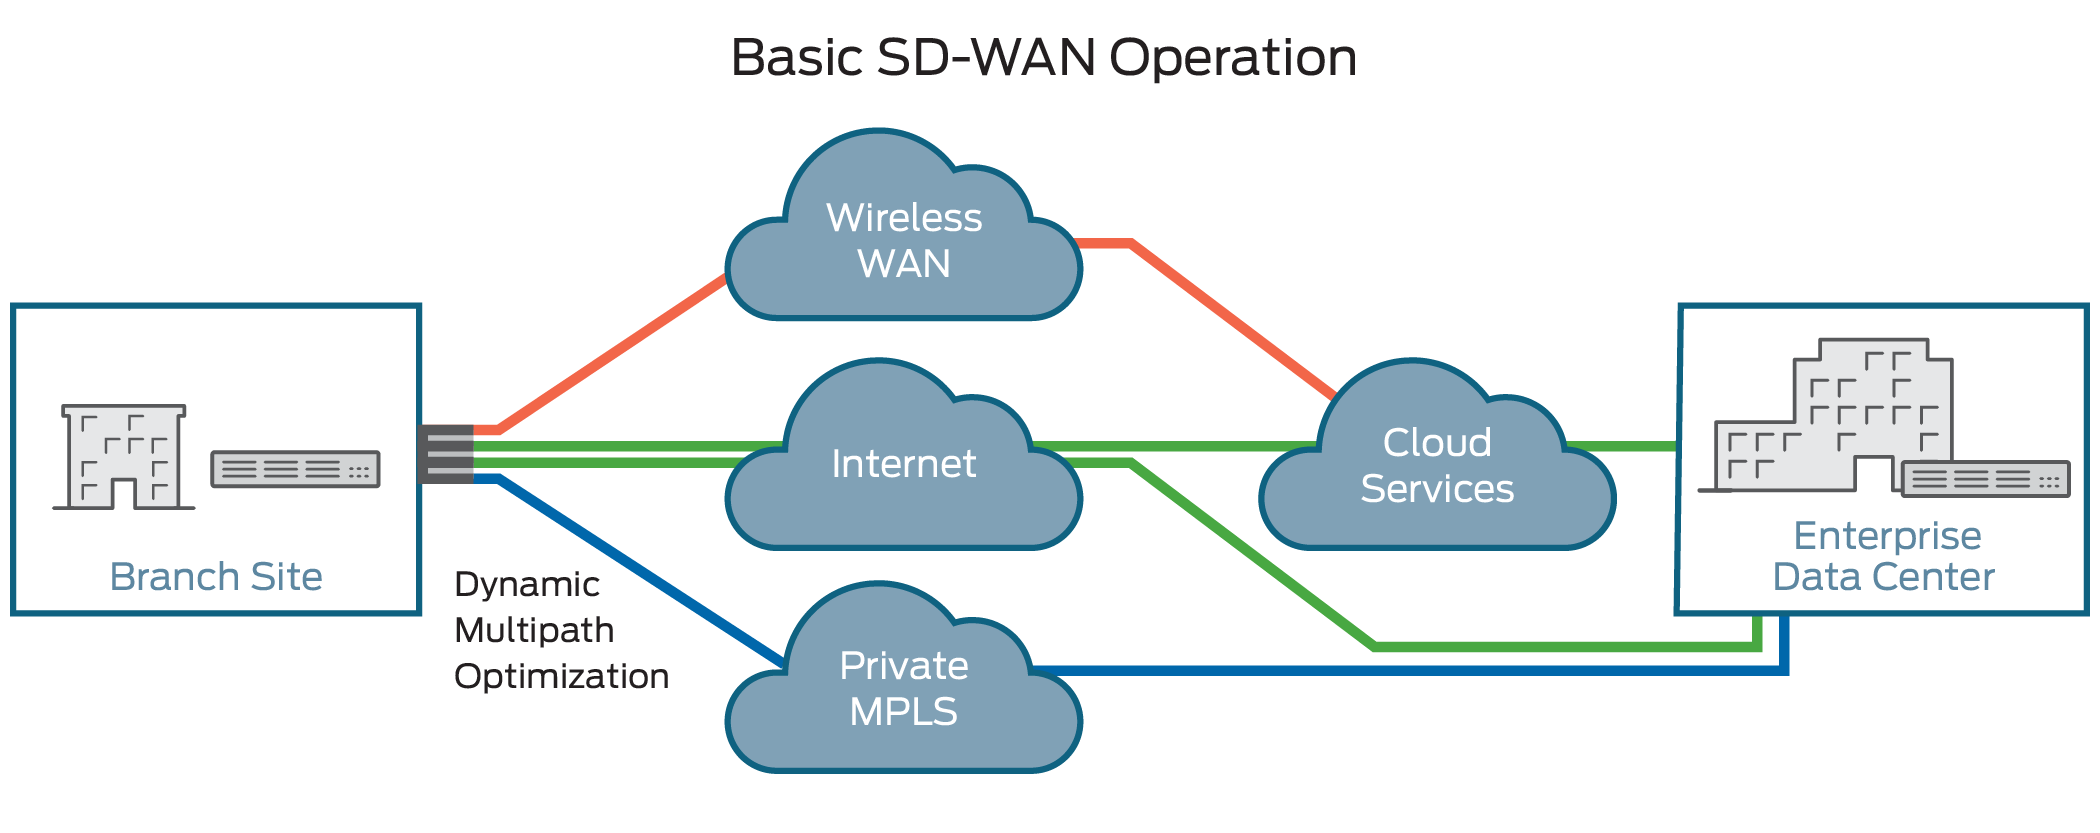 Why would you use SD-WAN?